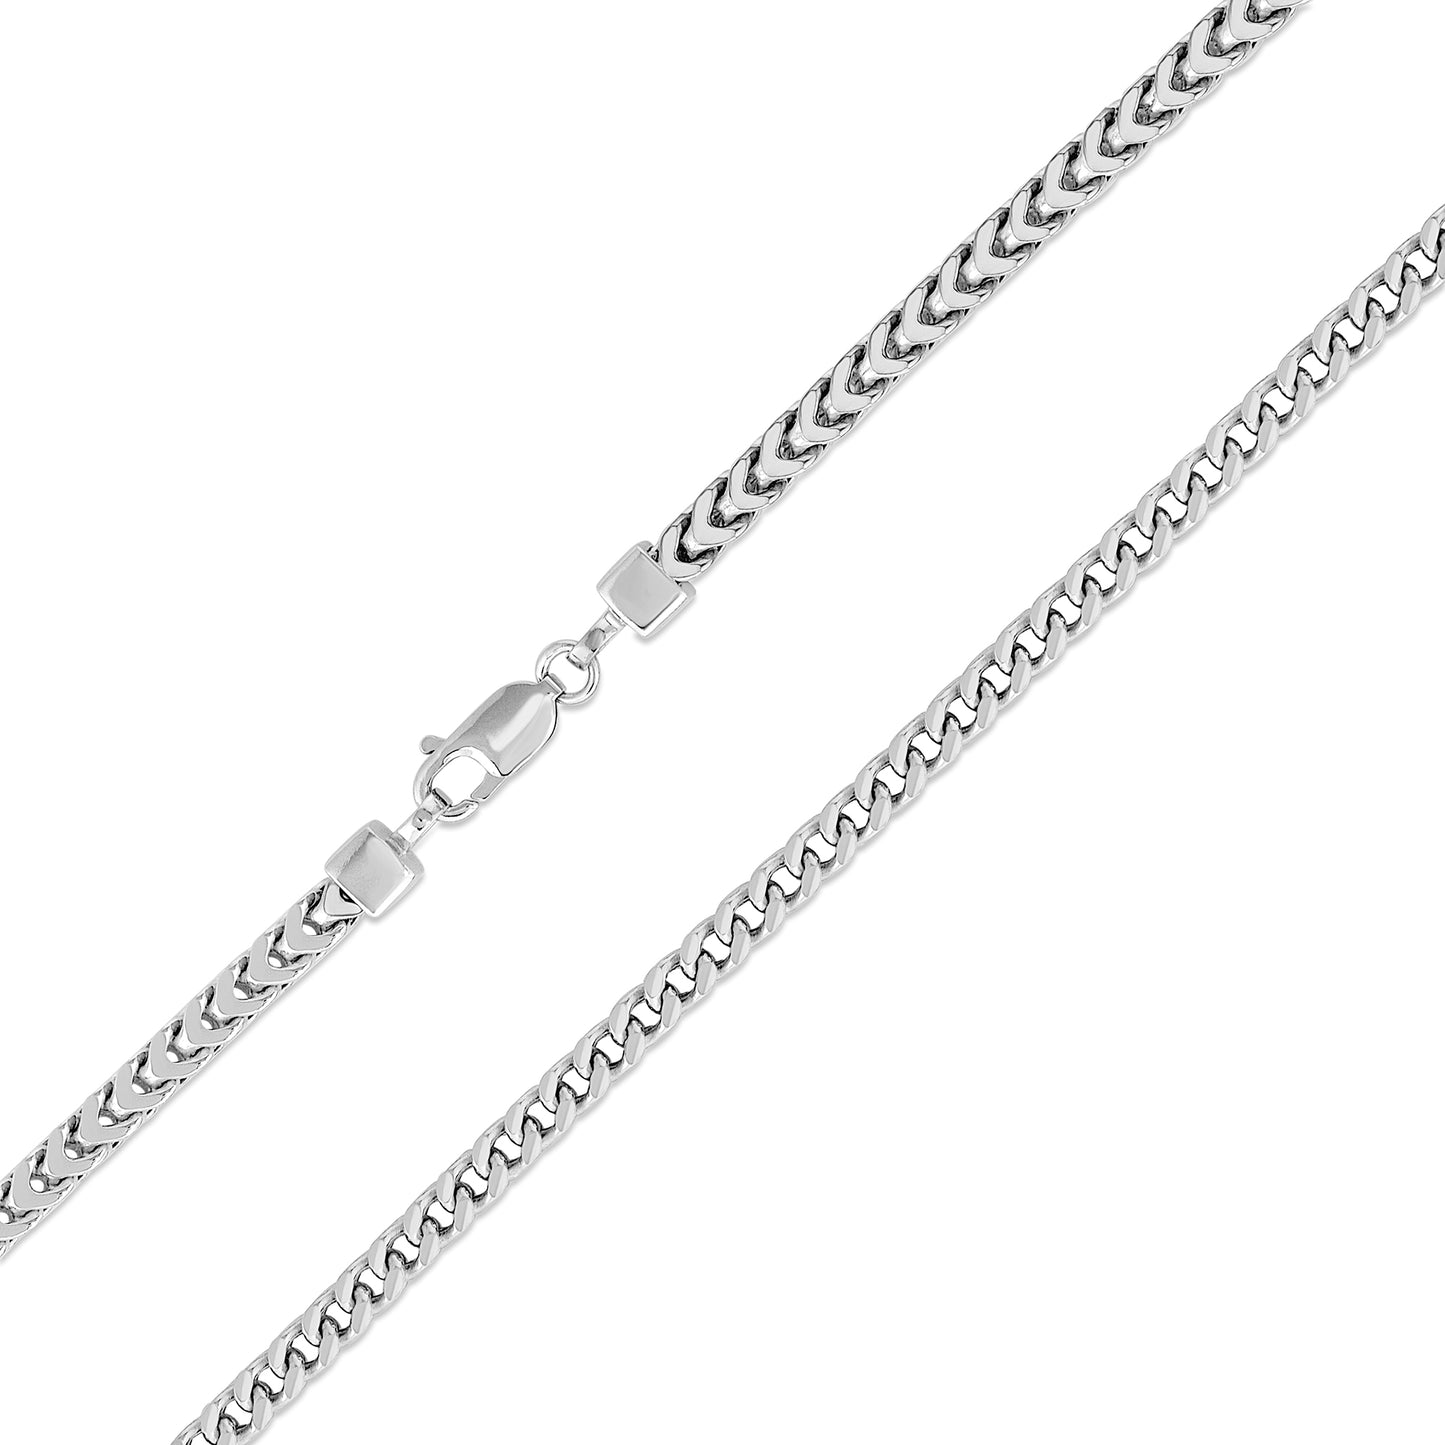 Silver 925 Rhodium Plated Franco Hollow Chain 8 mm. FRANCOH180R